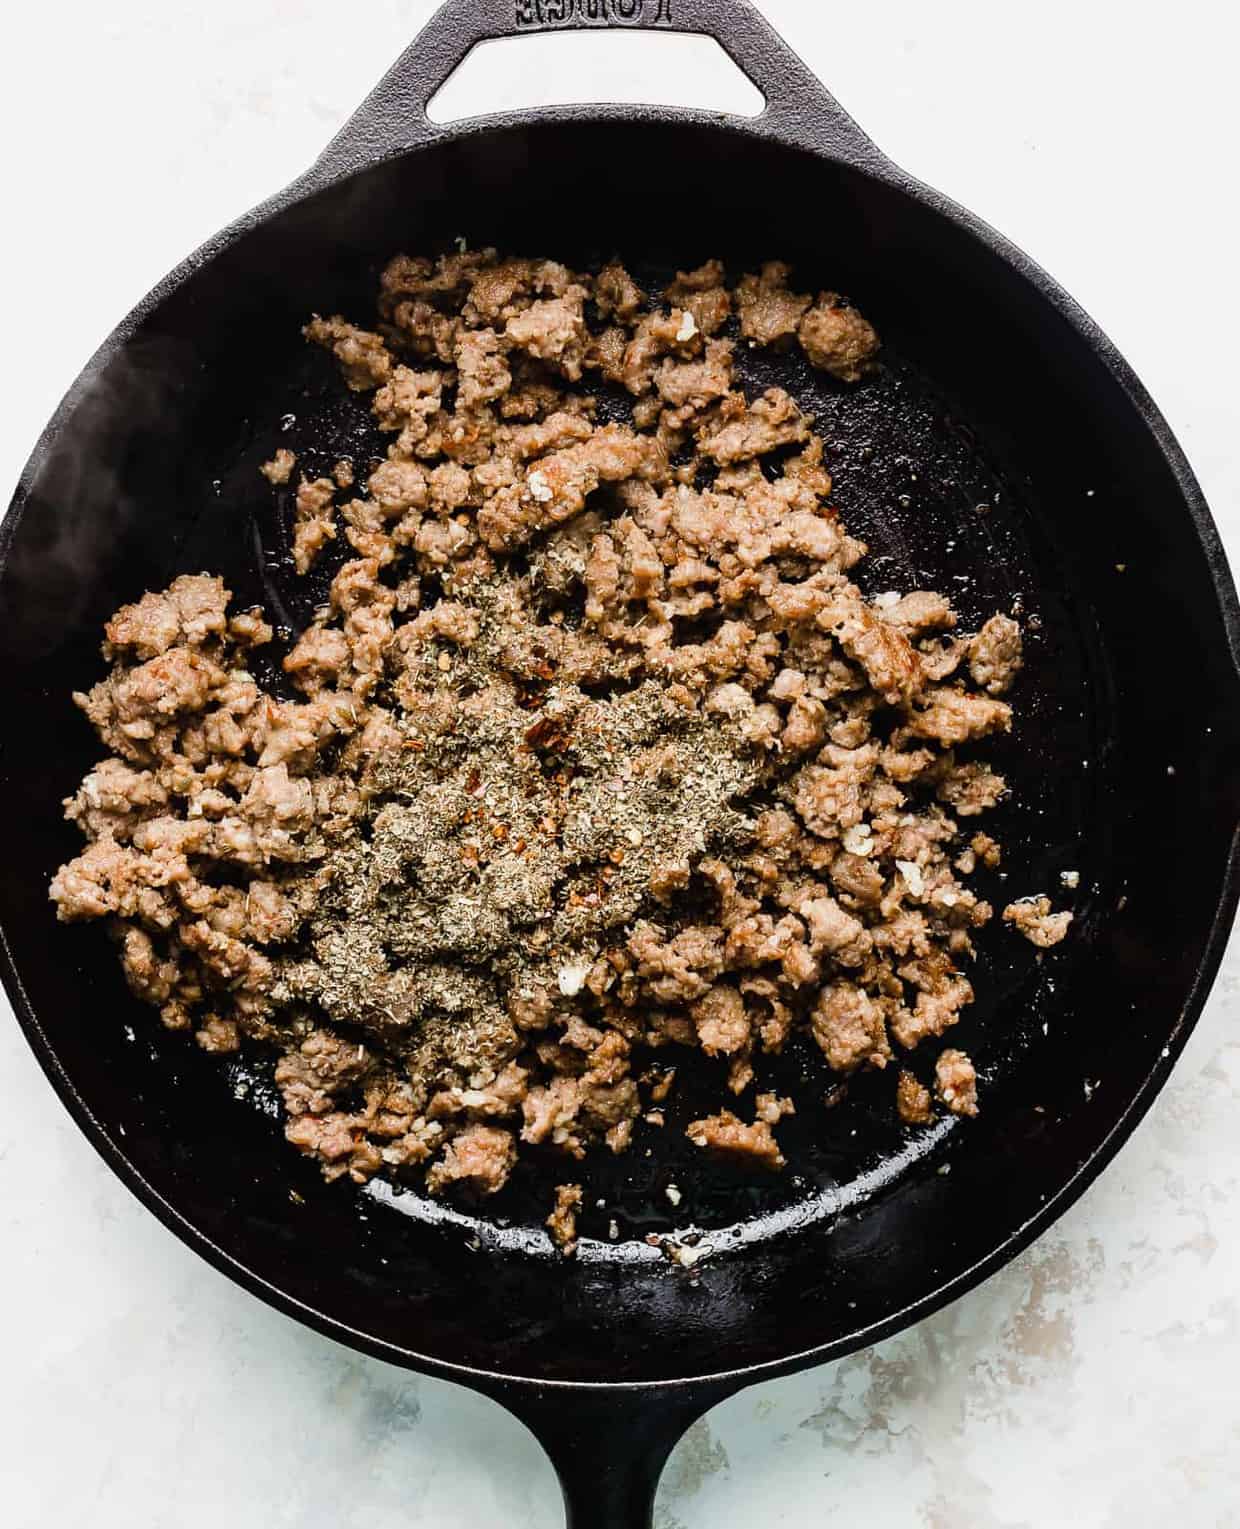 A black skillet with cooked Italian sausage with dried herbs sprinkled overtop.